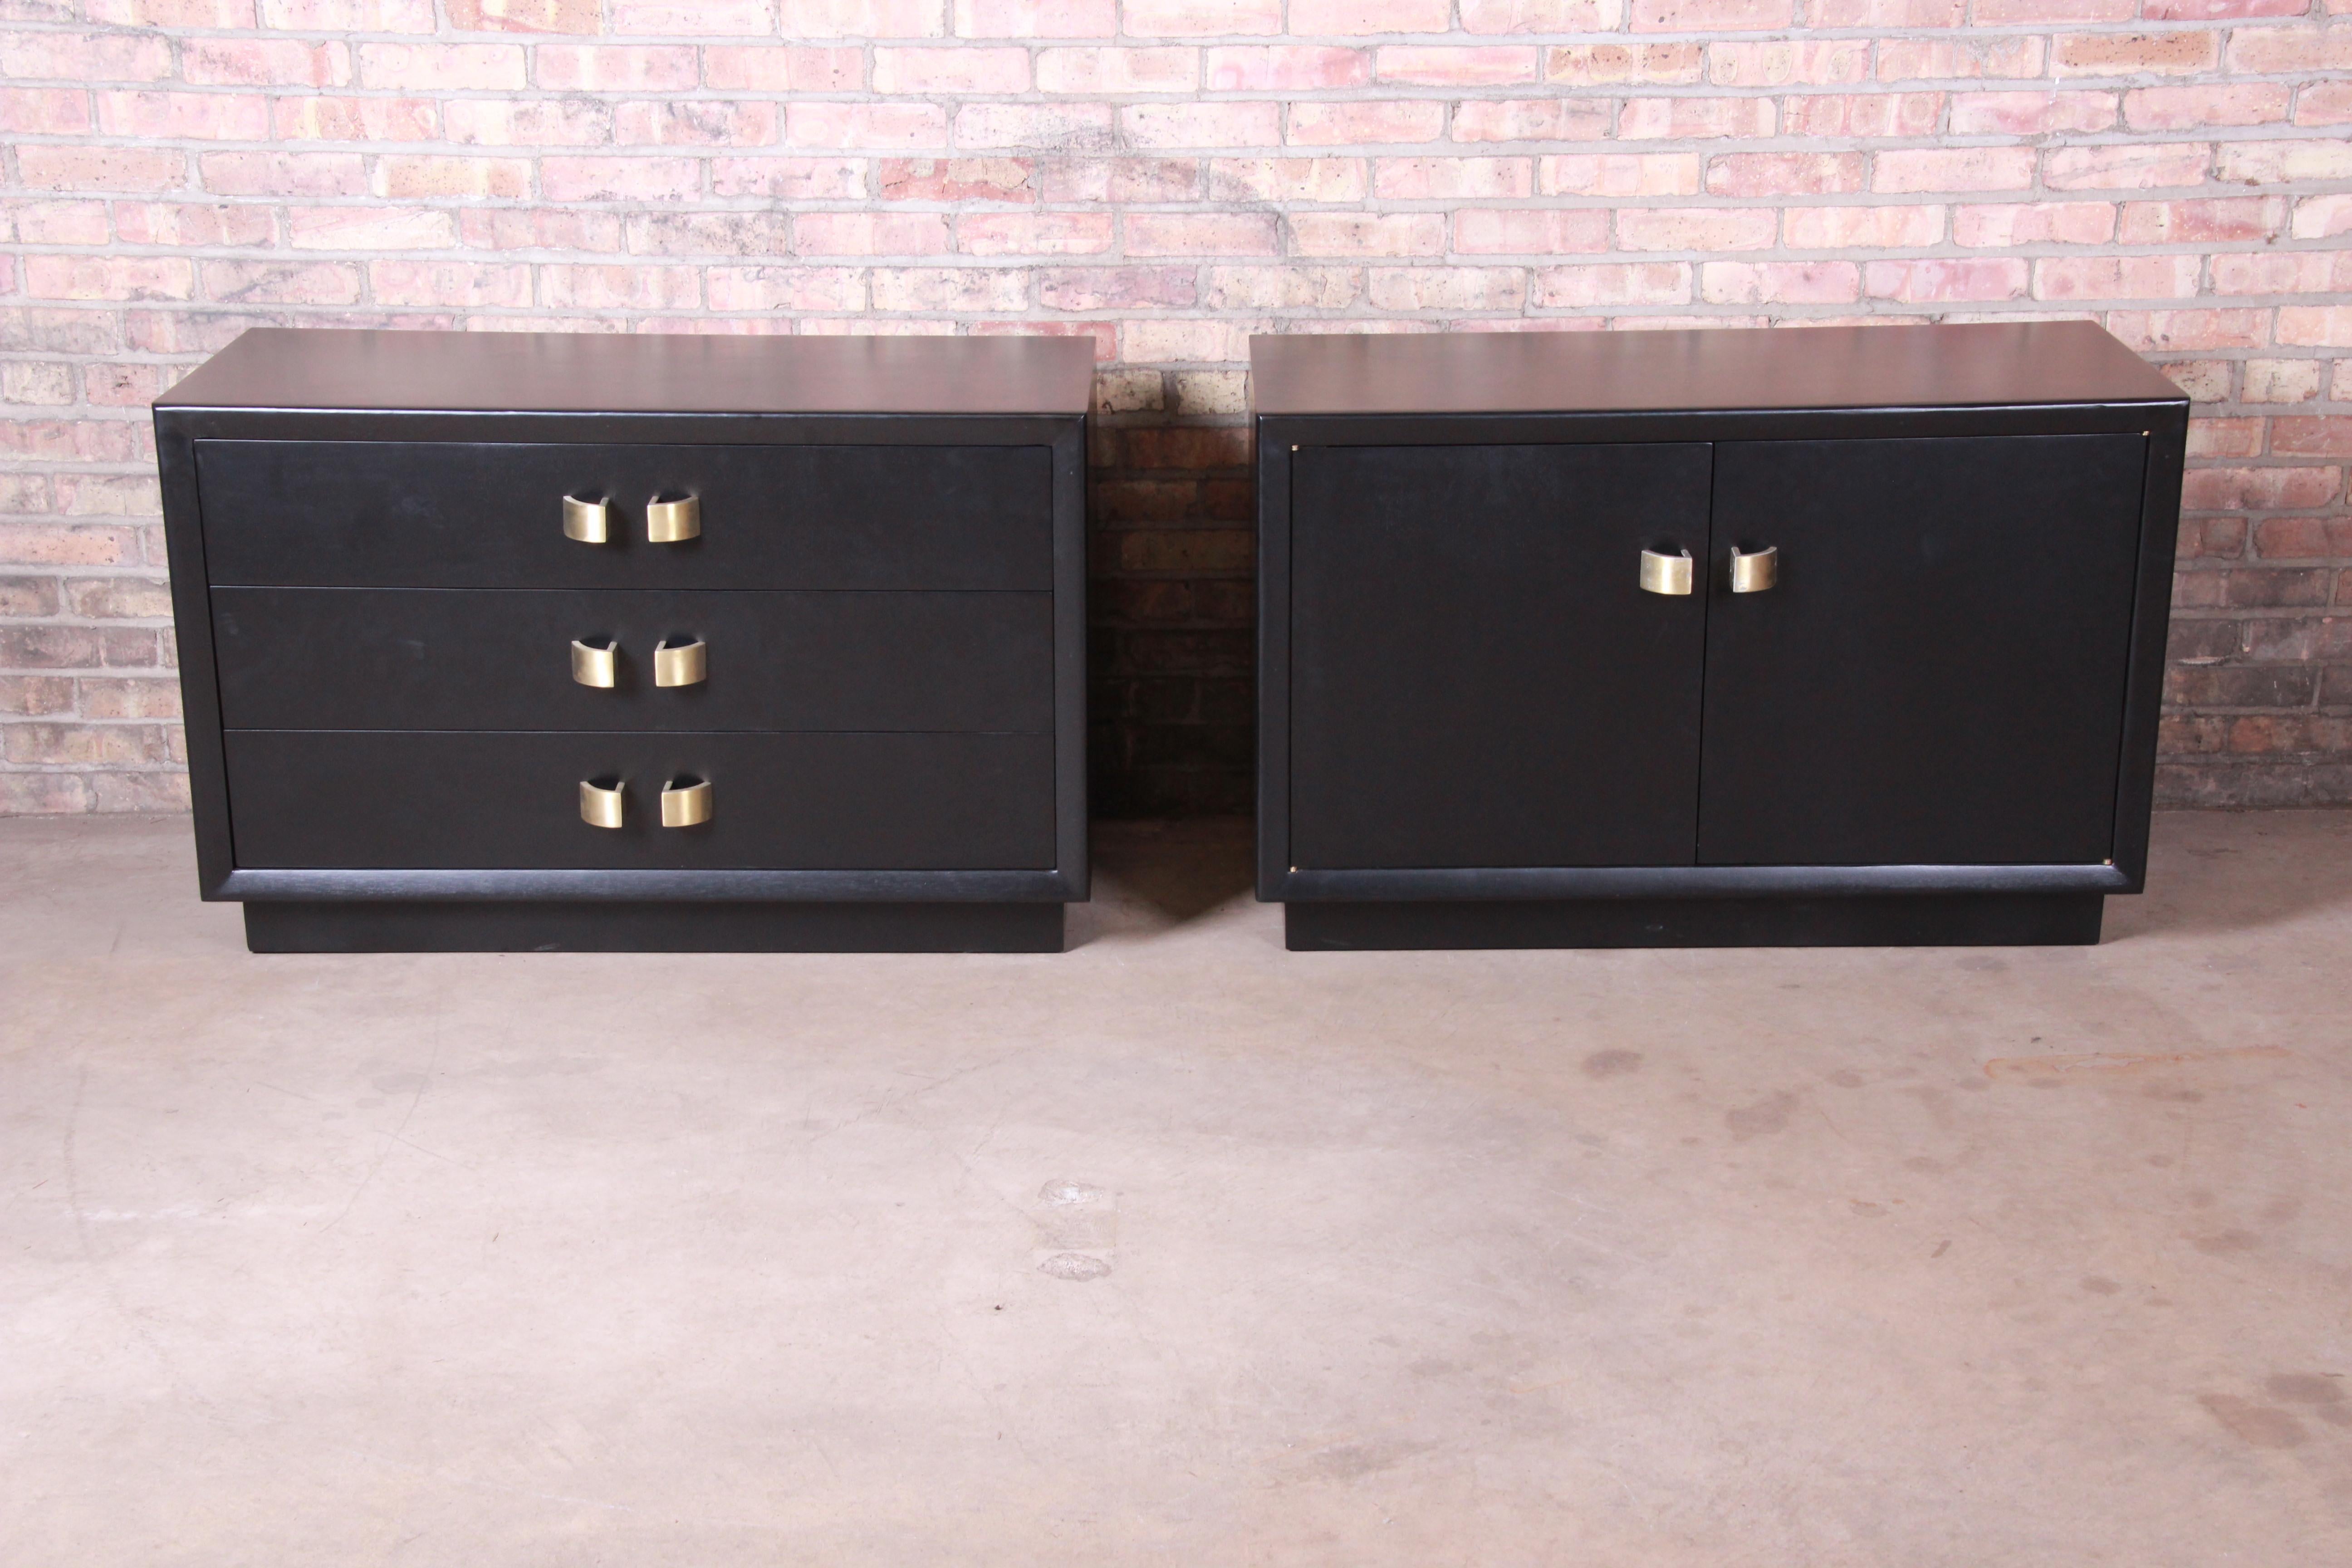 A gorgeous pair of Mid-Century Modern Hollywood Regency ebonized chests or large nightstands. One featuring three drawers; the other with a single shelf behind two cabinet doors.

Attributed to James Mont

USA, circa 1950s

Measures: 41.75